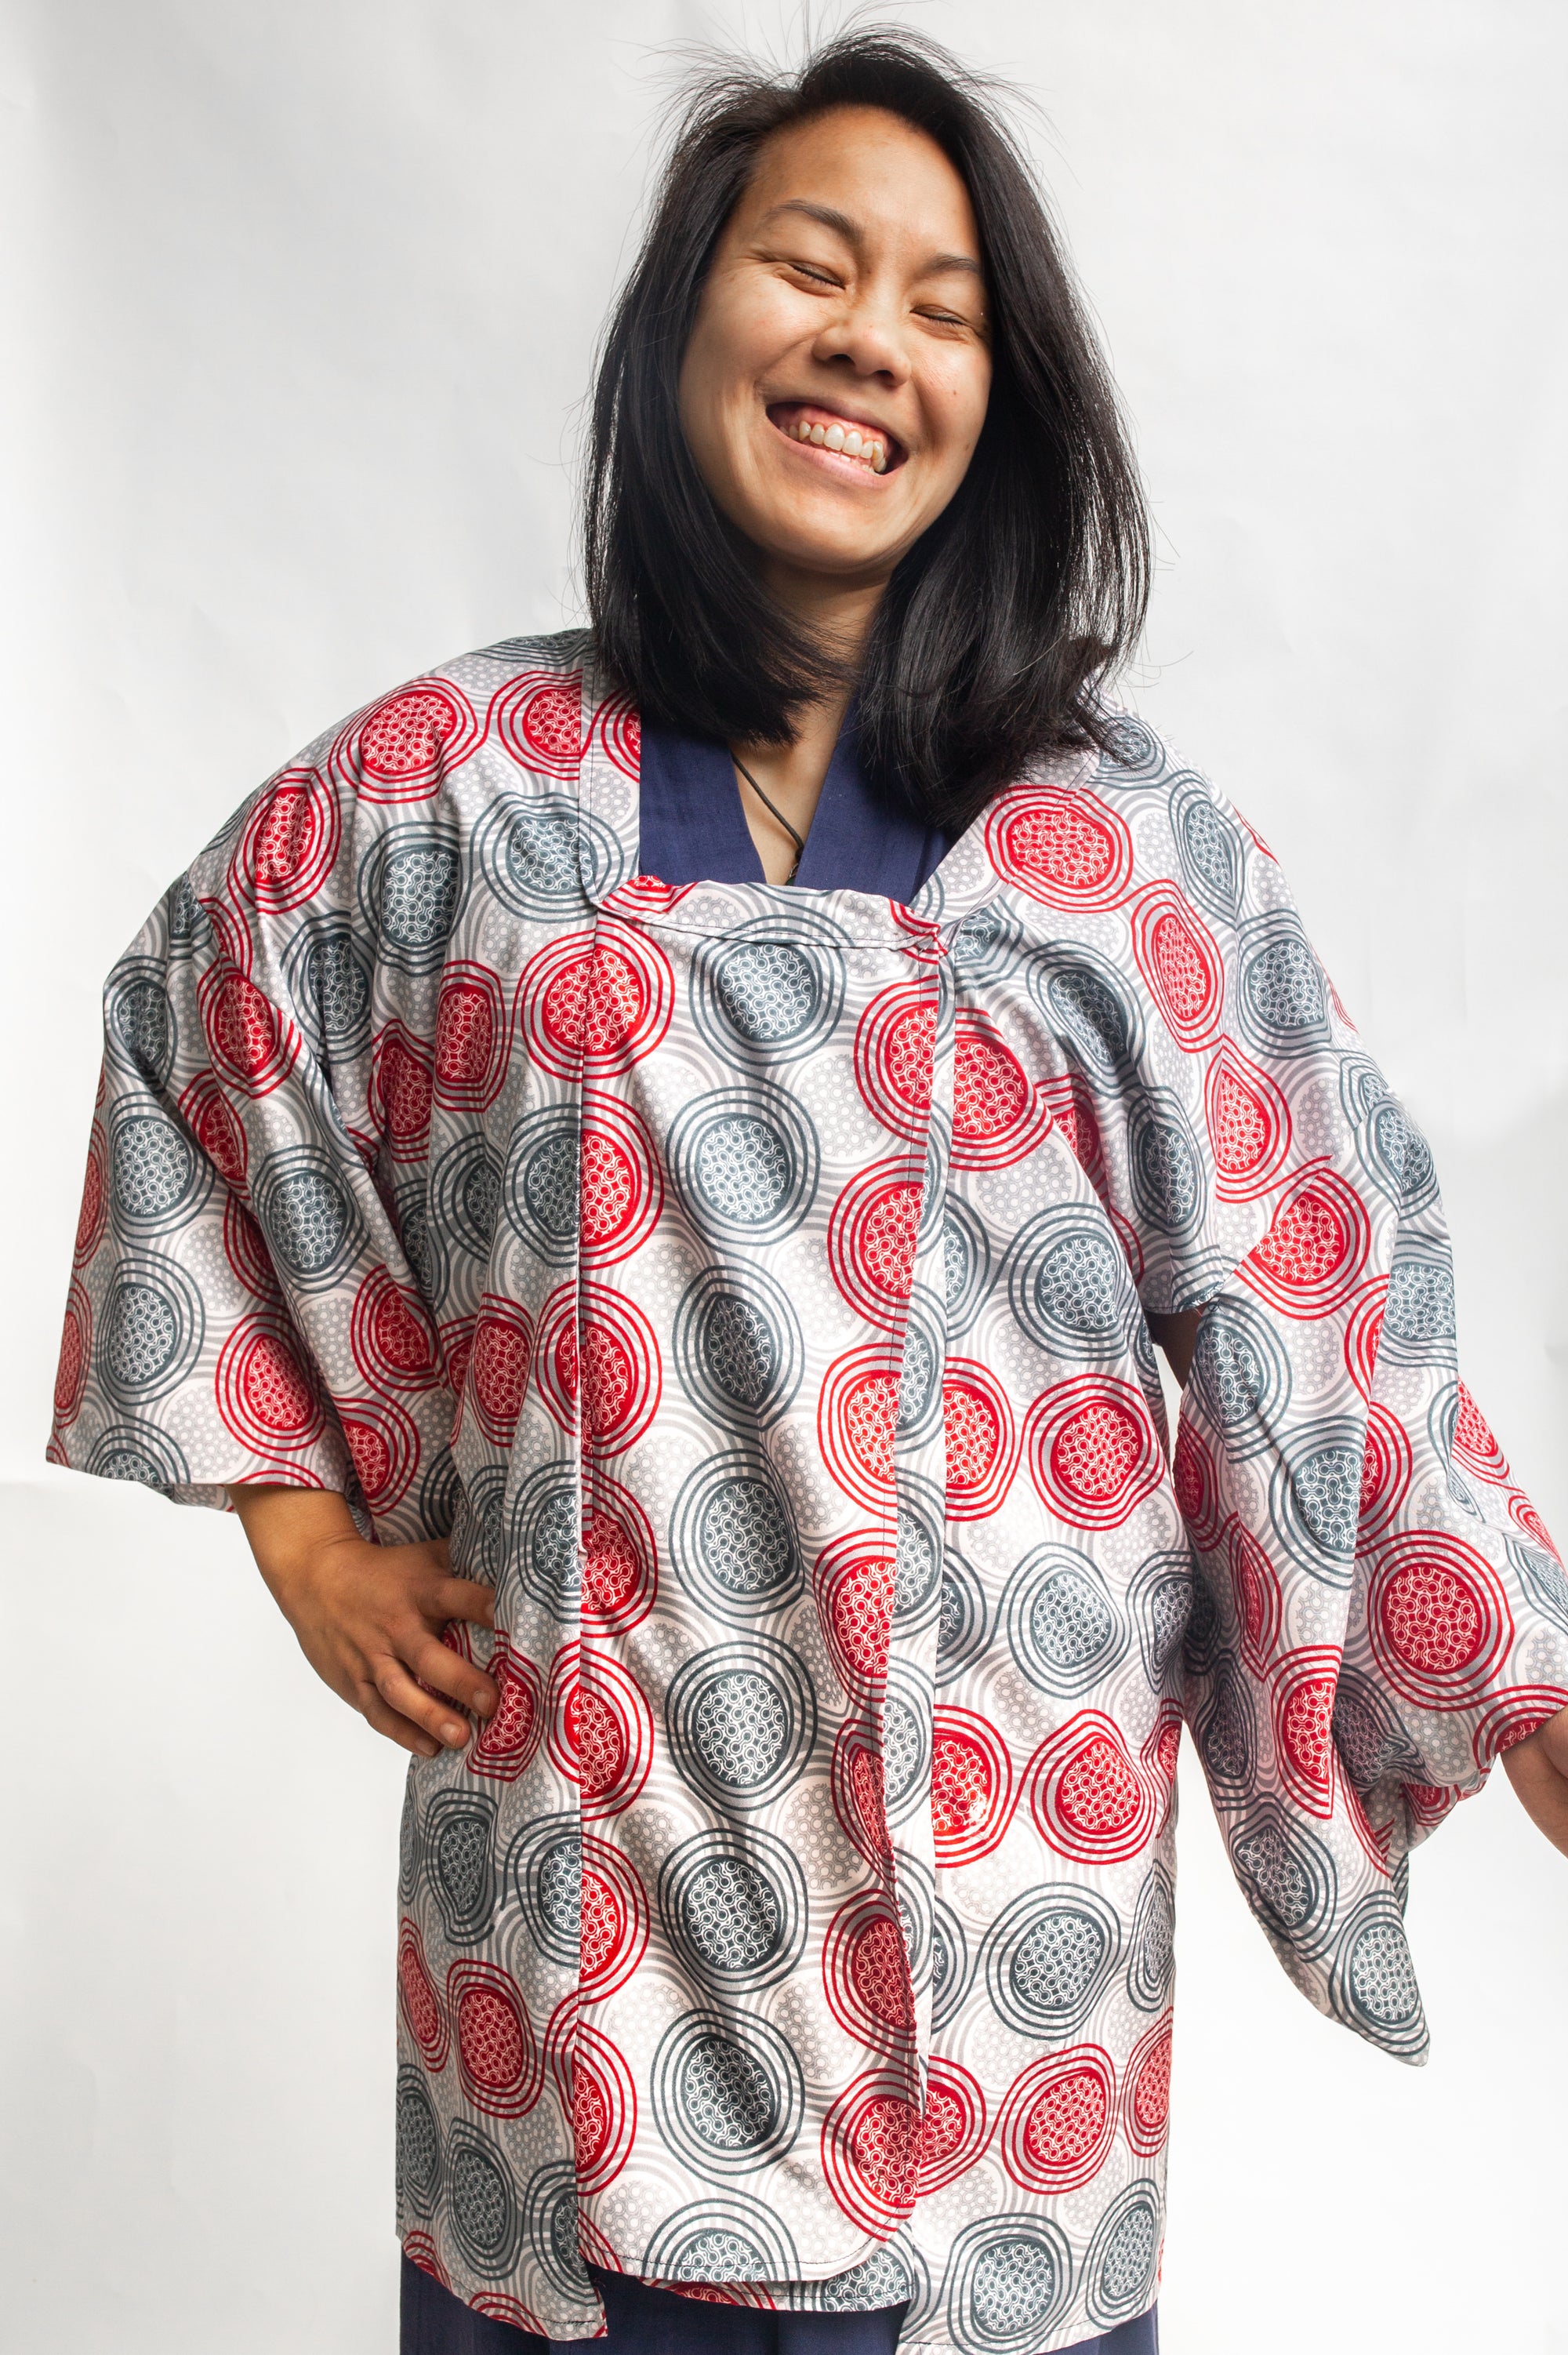 Smiling woman wearing a red and grey spiral printed ankara fabric made into a Michiyuki over a blue cotton kimono.  In front of a white back drop. 